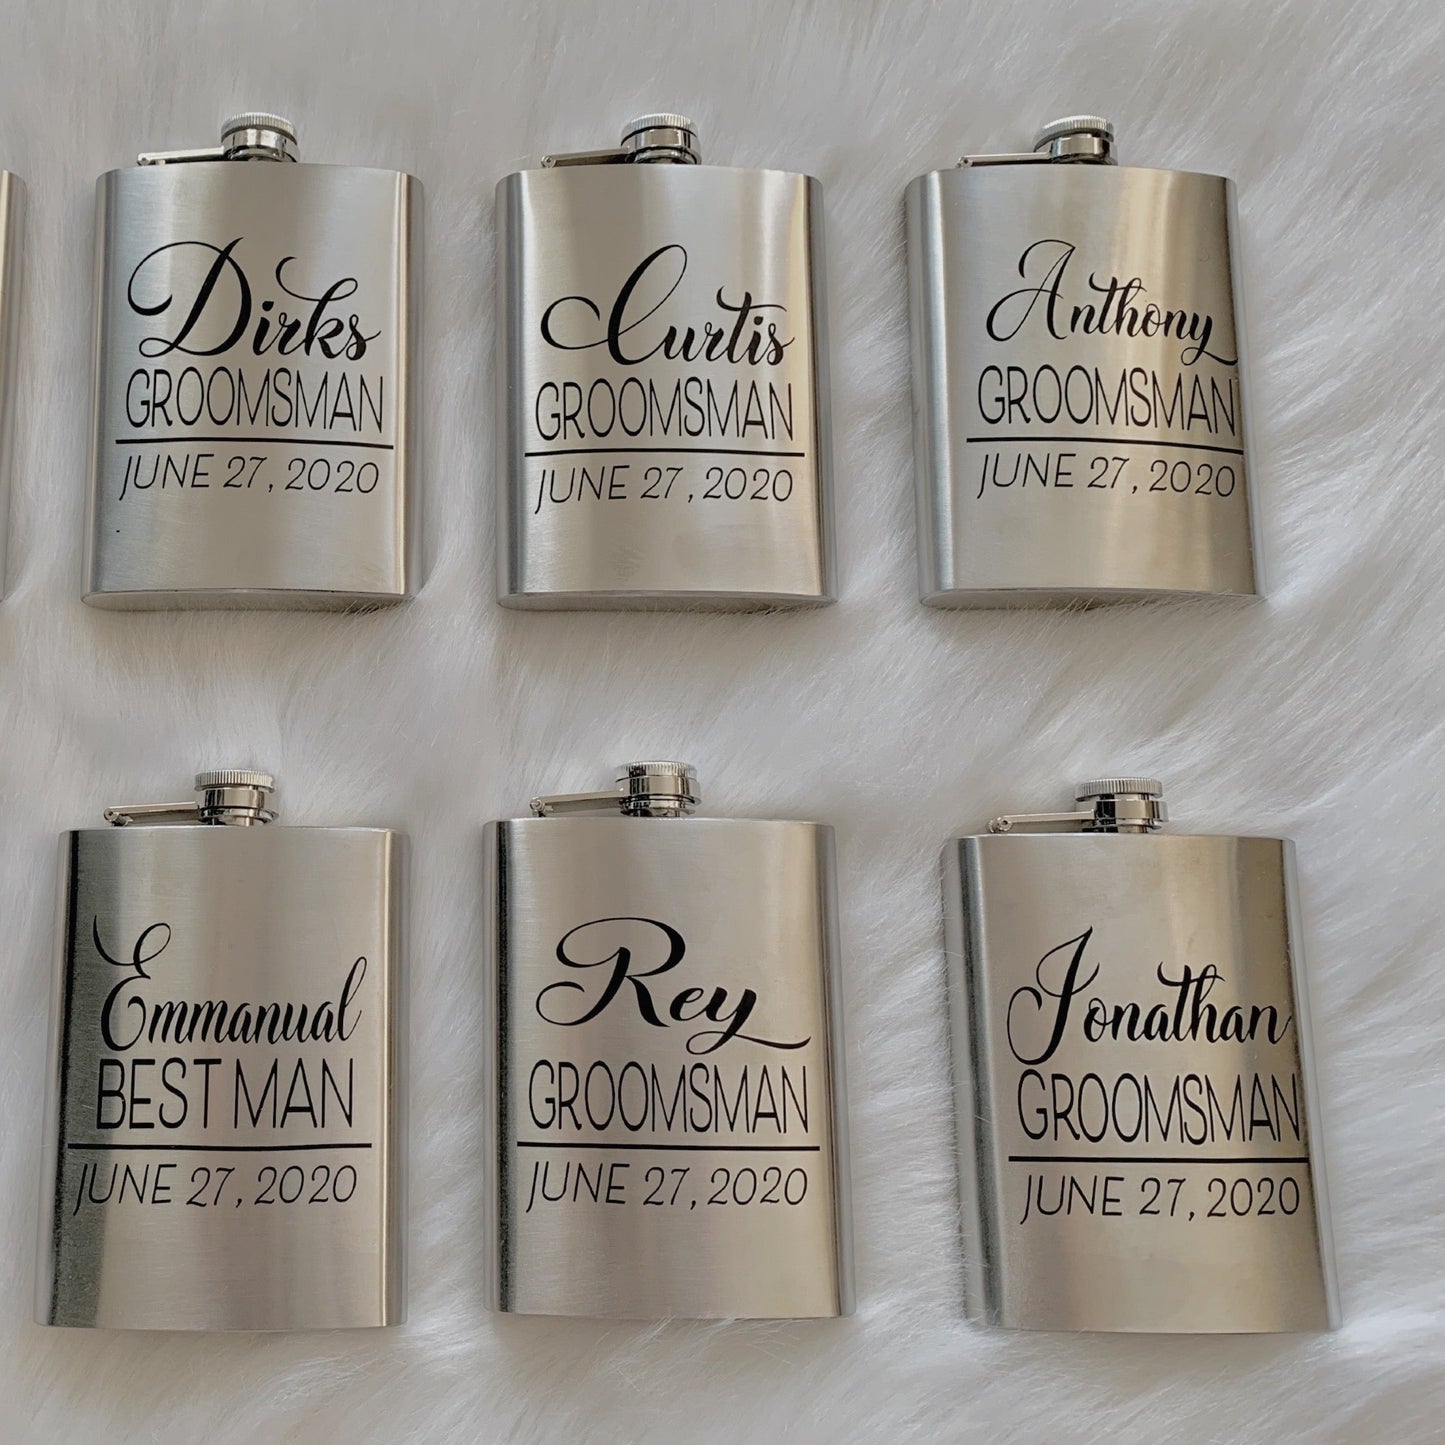 Six stainless steel flasks can be seen laying on a white background. Each flask has a name, title (i.e. groomsman) and a date.